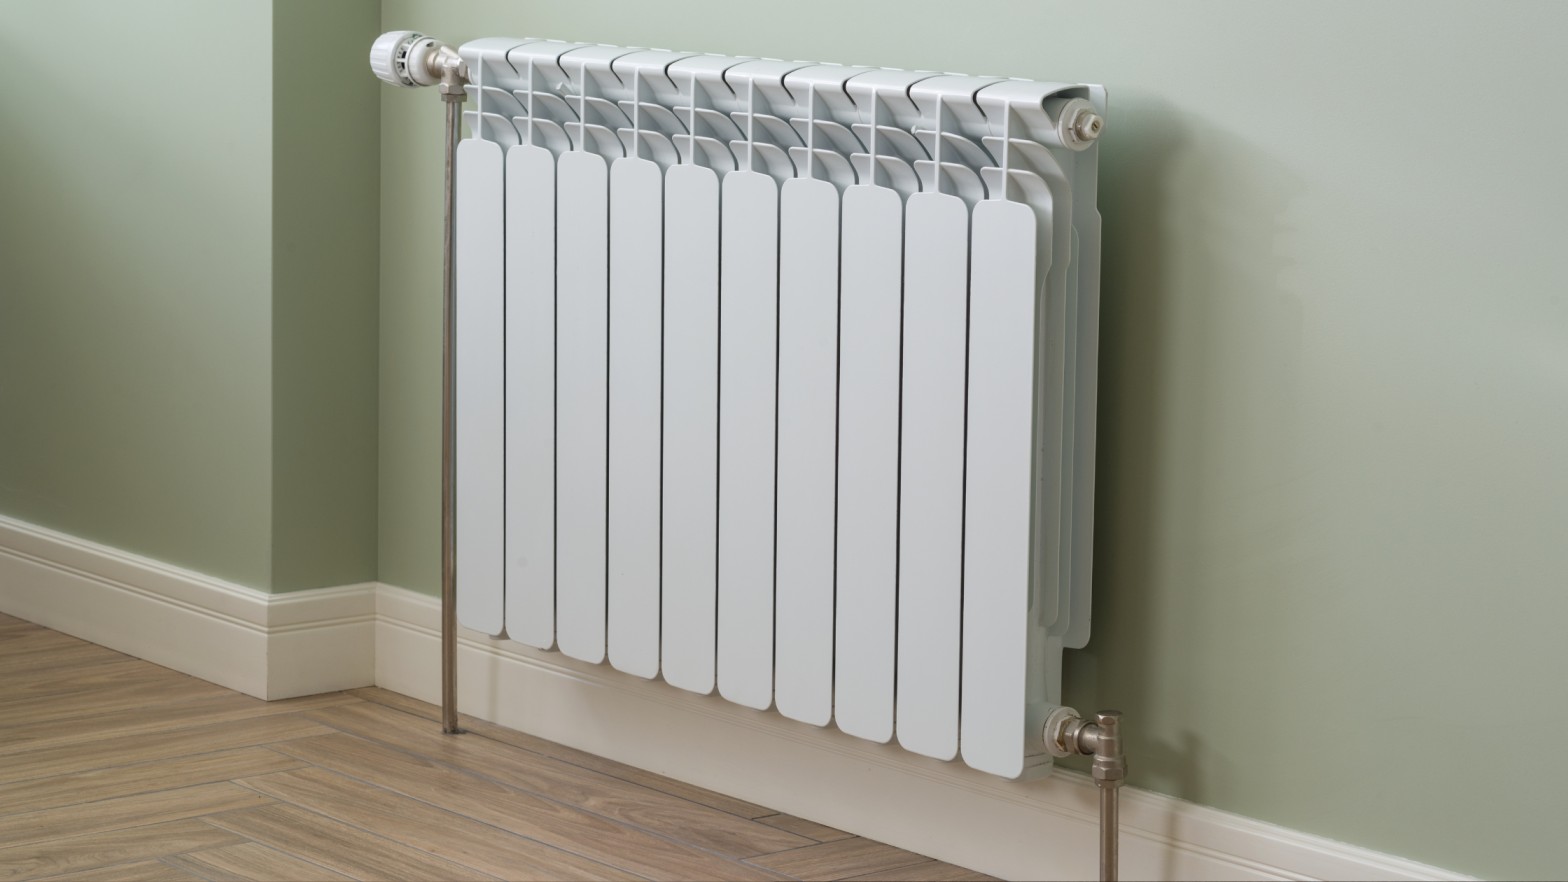 Central Heating System vs Oil-Filled Radiators — Which is a better heating solution?